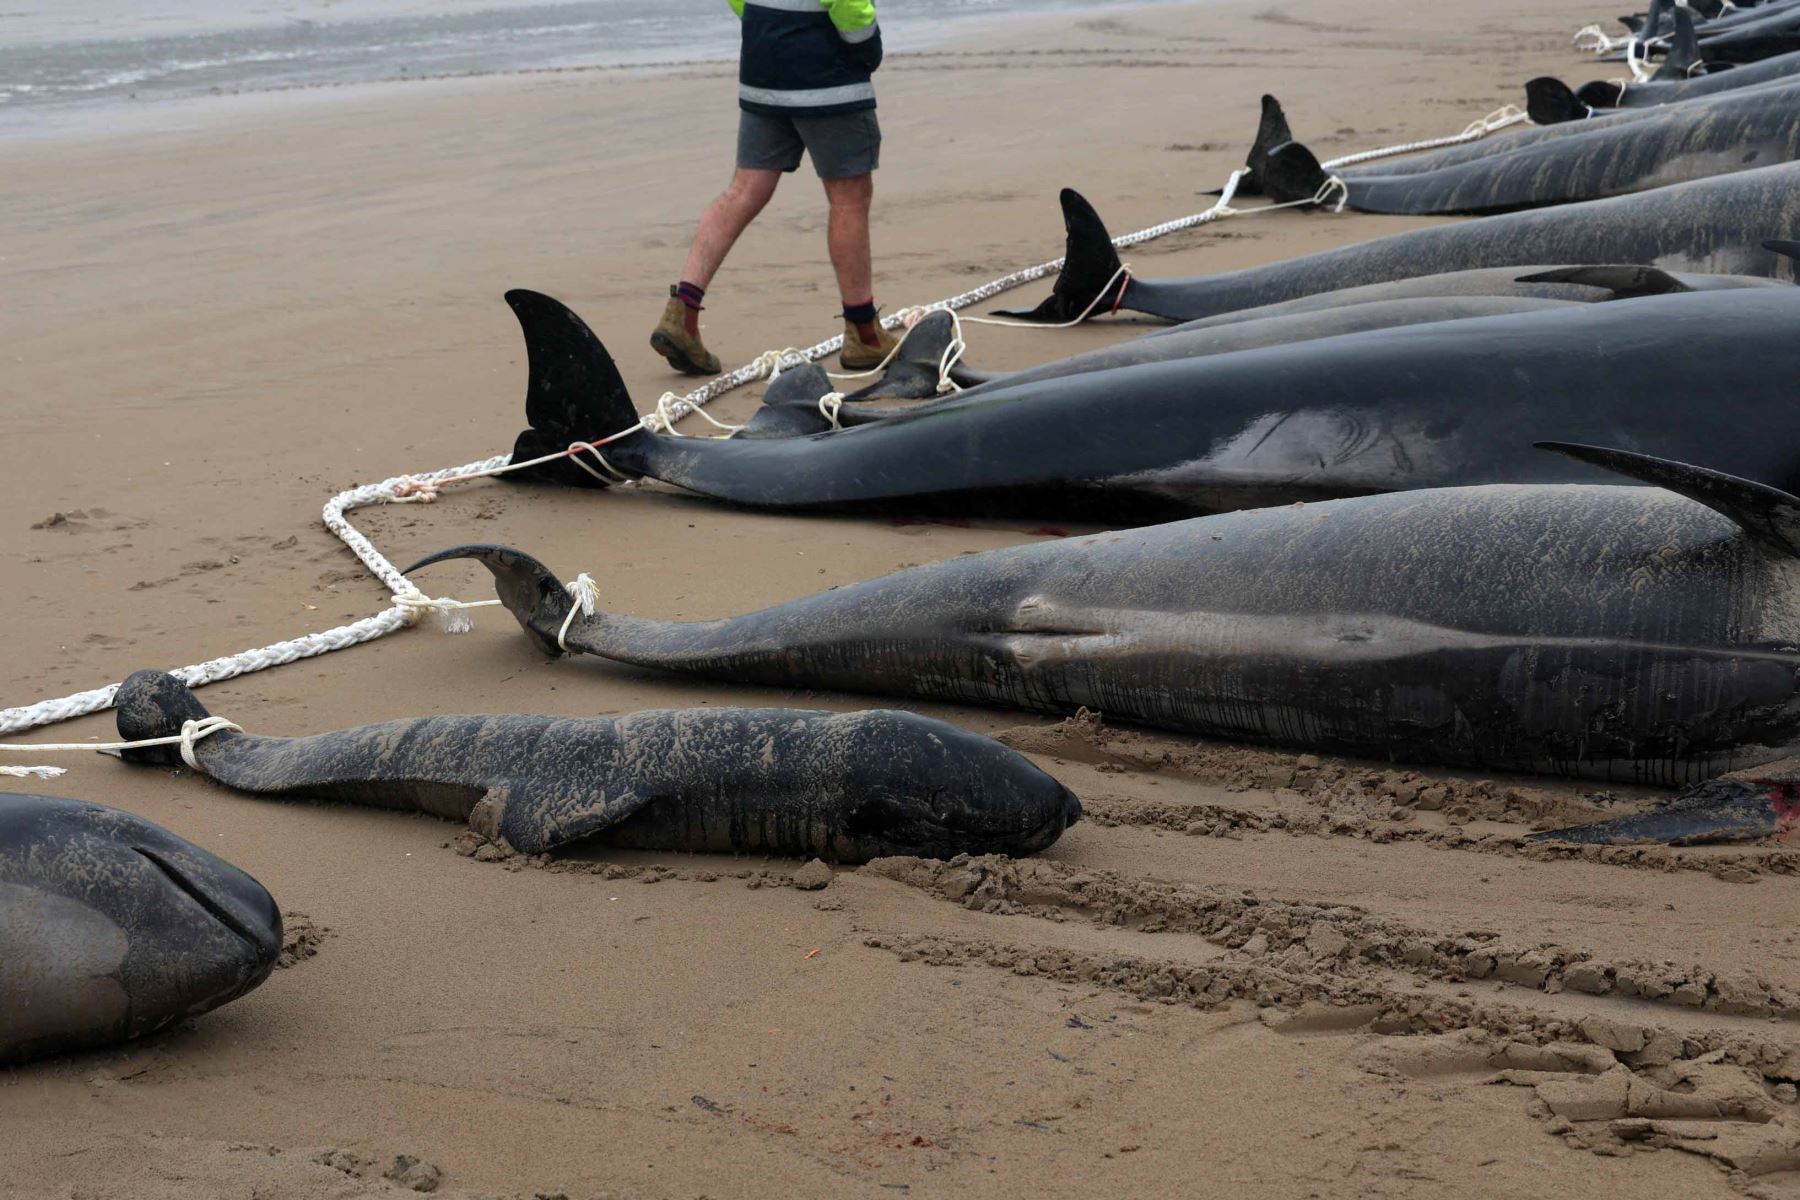 Nearly 200 Pilot Whales Died On A Beach In Macquarie Bay, West Of The Australian Island Of Tasmania, And 35 Were Rescued Alive After Being Largely Stranded In This Remote Location, Country Officials Reported On Thursday.